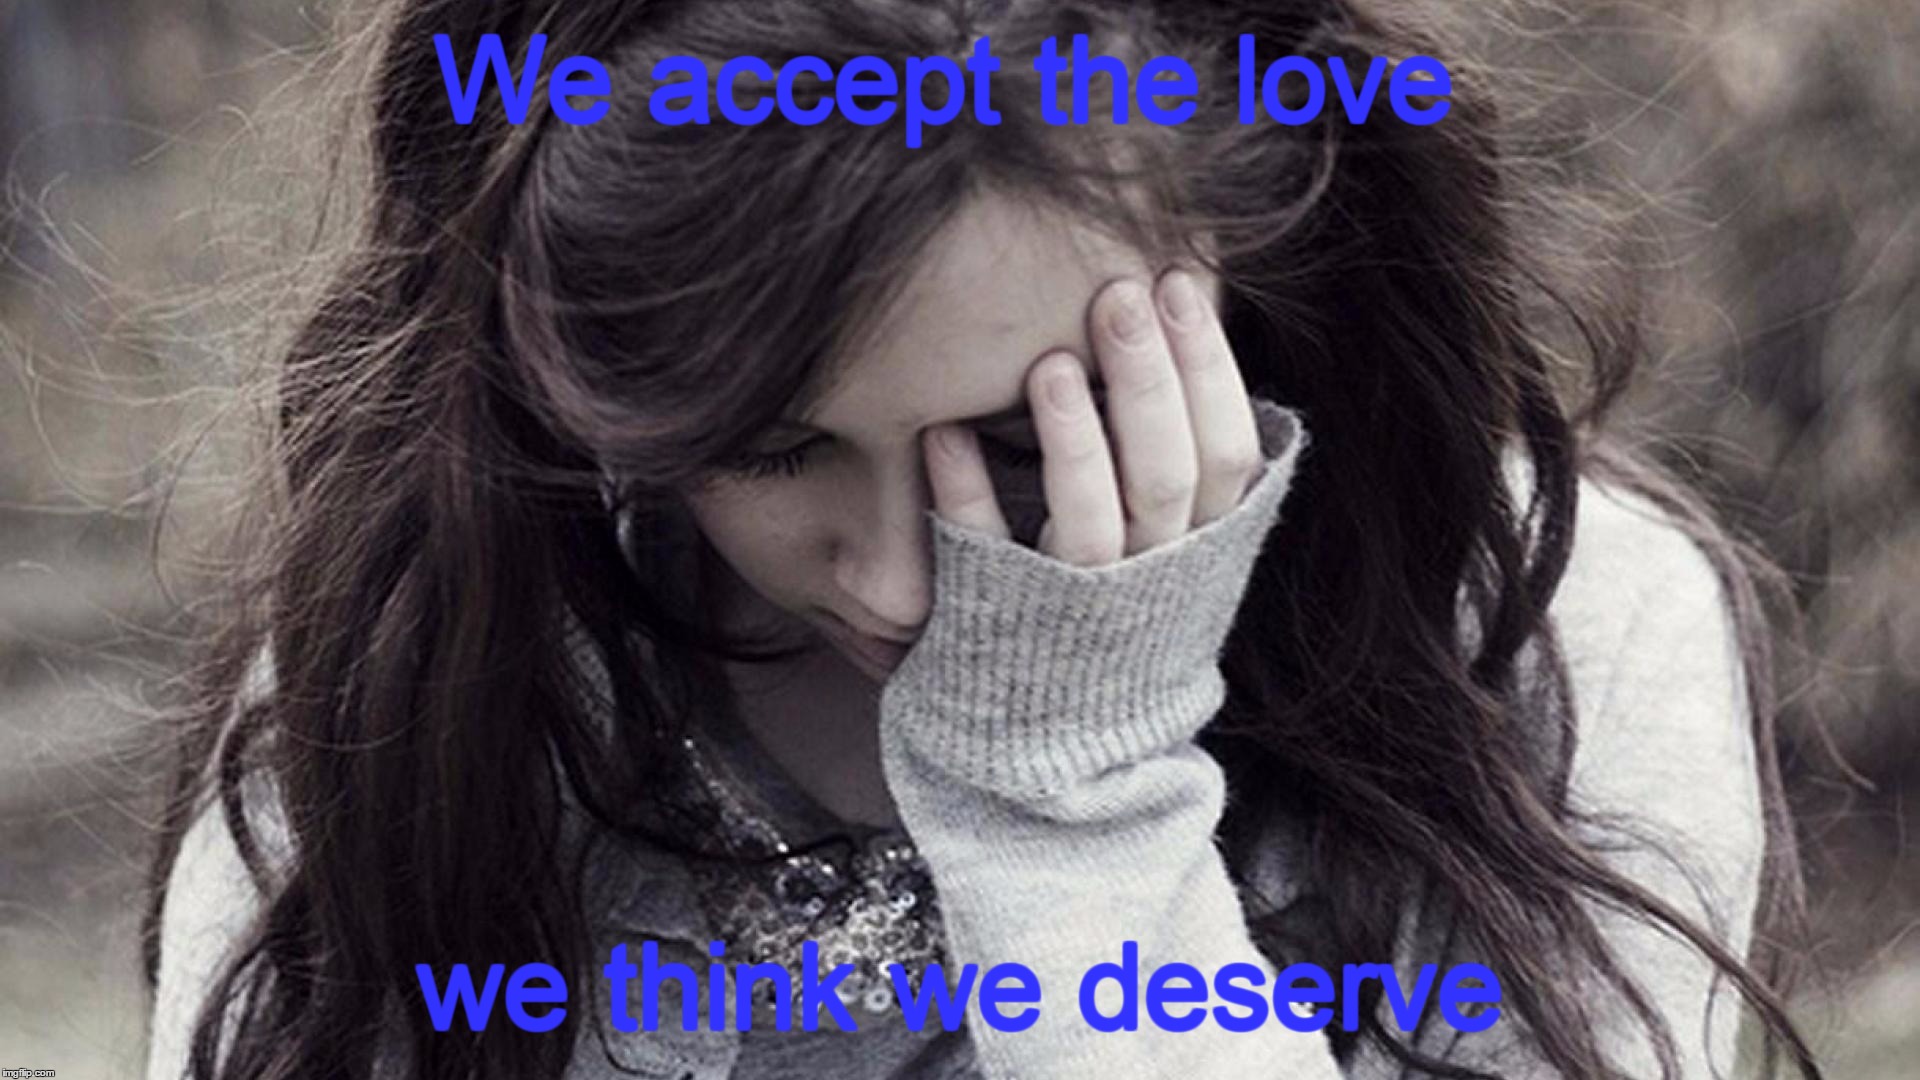 The Perks of being a Wallflower quote. | We accept the love; we think we deserve | image tagged in the perks of being a wallflower,quotes,sad girl meme | made w/ Imgflip meme maker